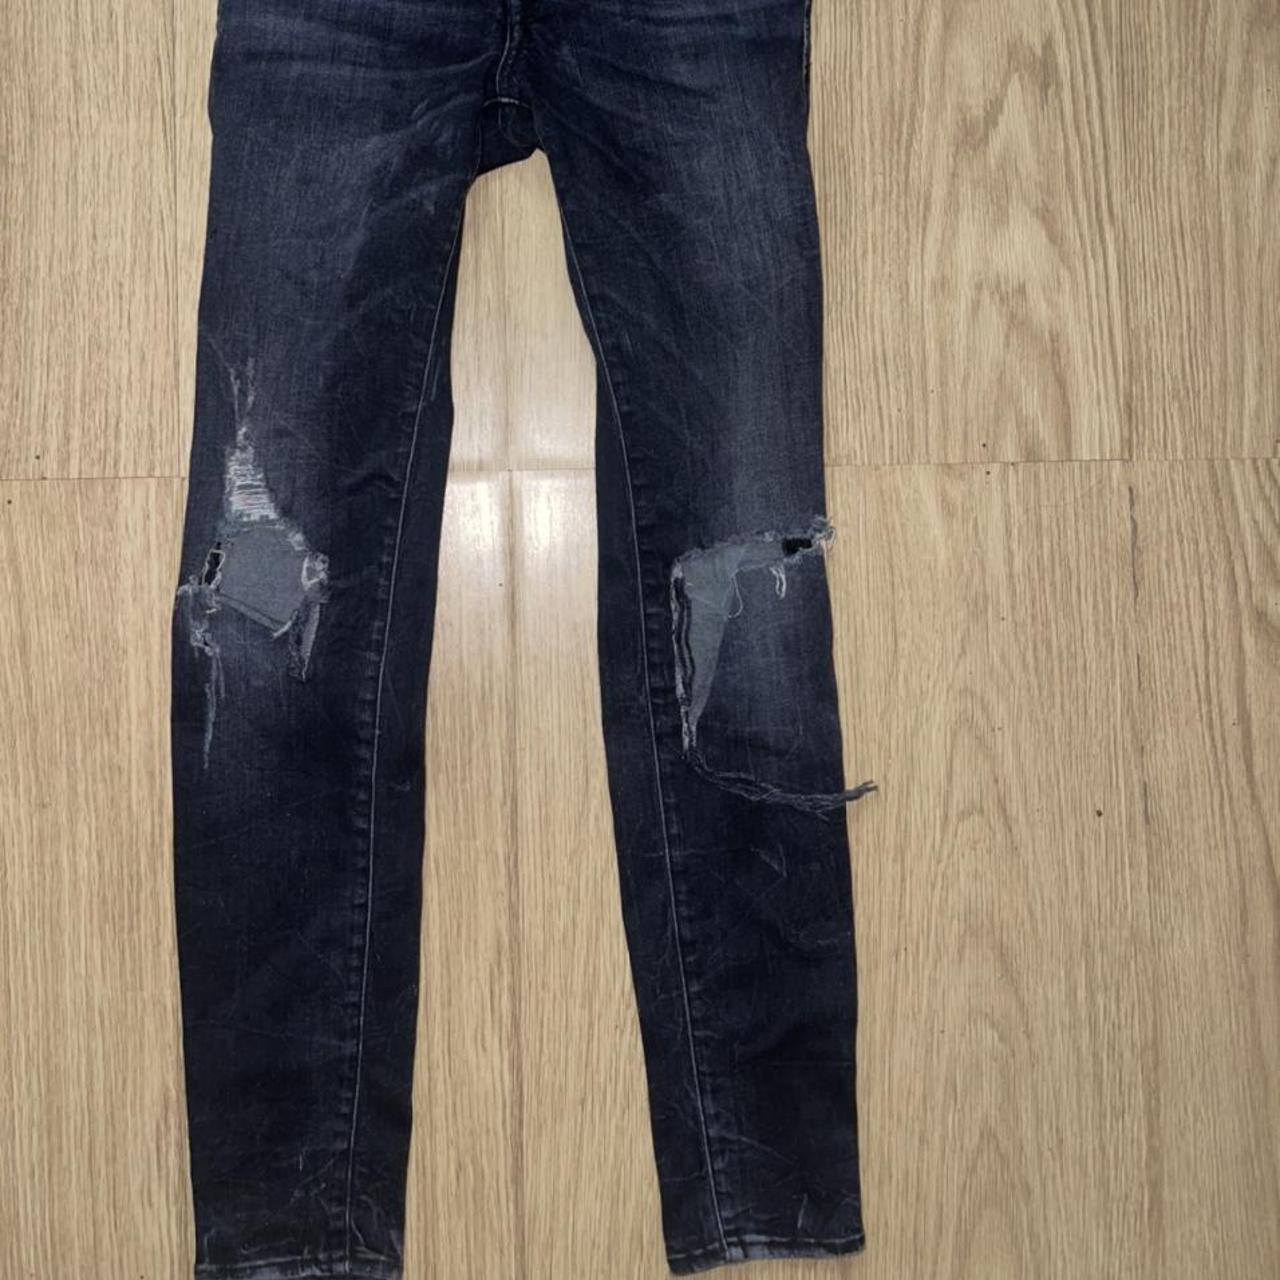 R13 Size 26 super skinny jeans. They’re so so cute!... - Depop